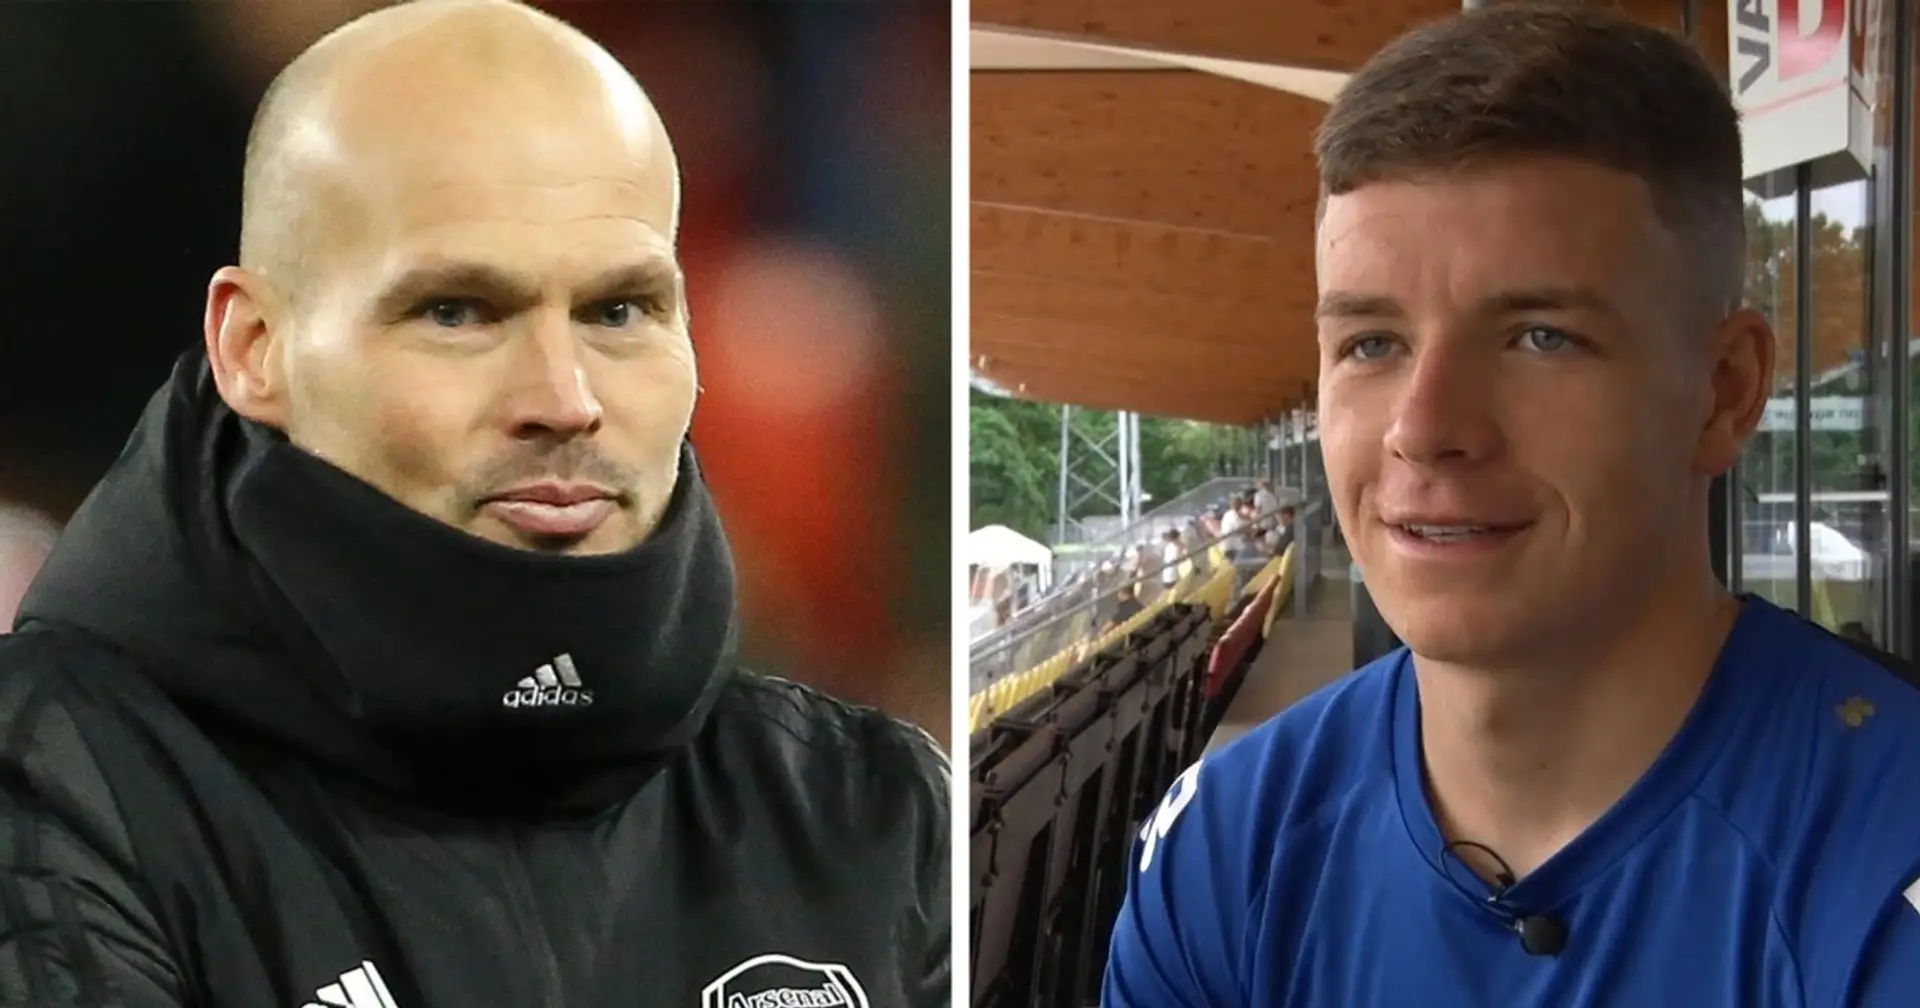 Ex-Arsenal youngster Gilmour piles praise on Ljungberg: 'You just love talking to him because he is so into football'